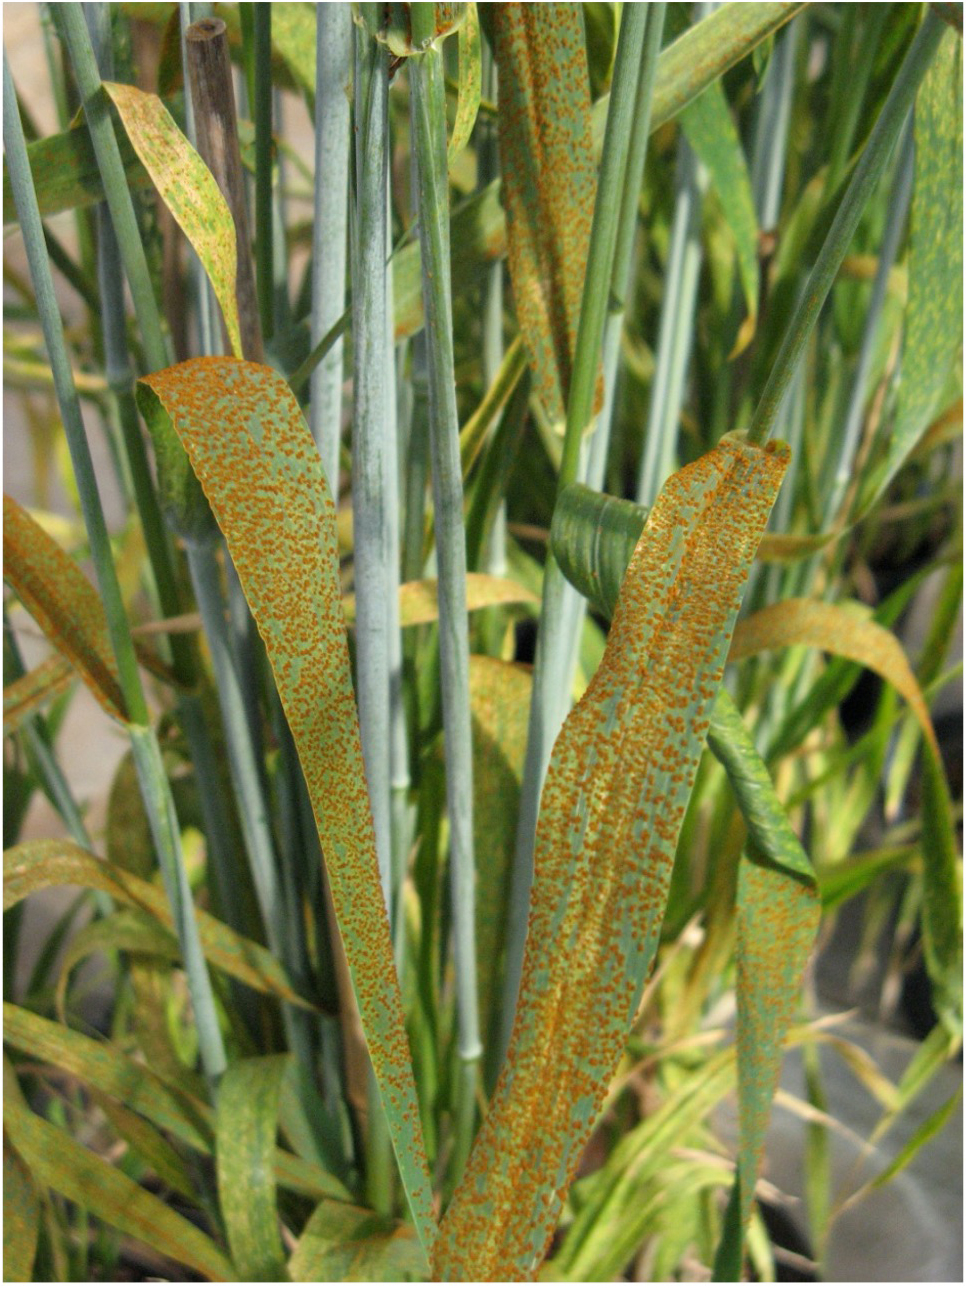 wheat with leaf rust